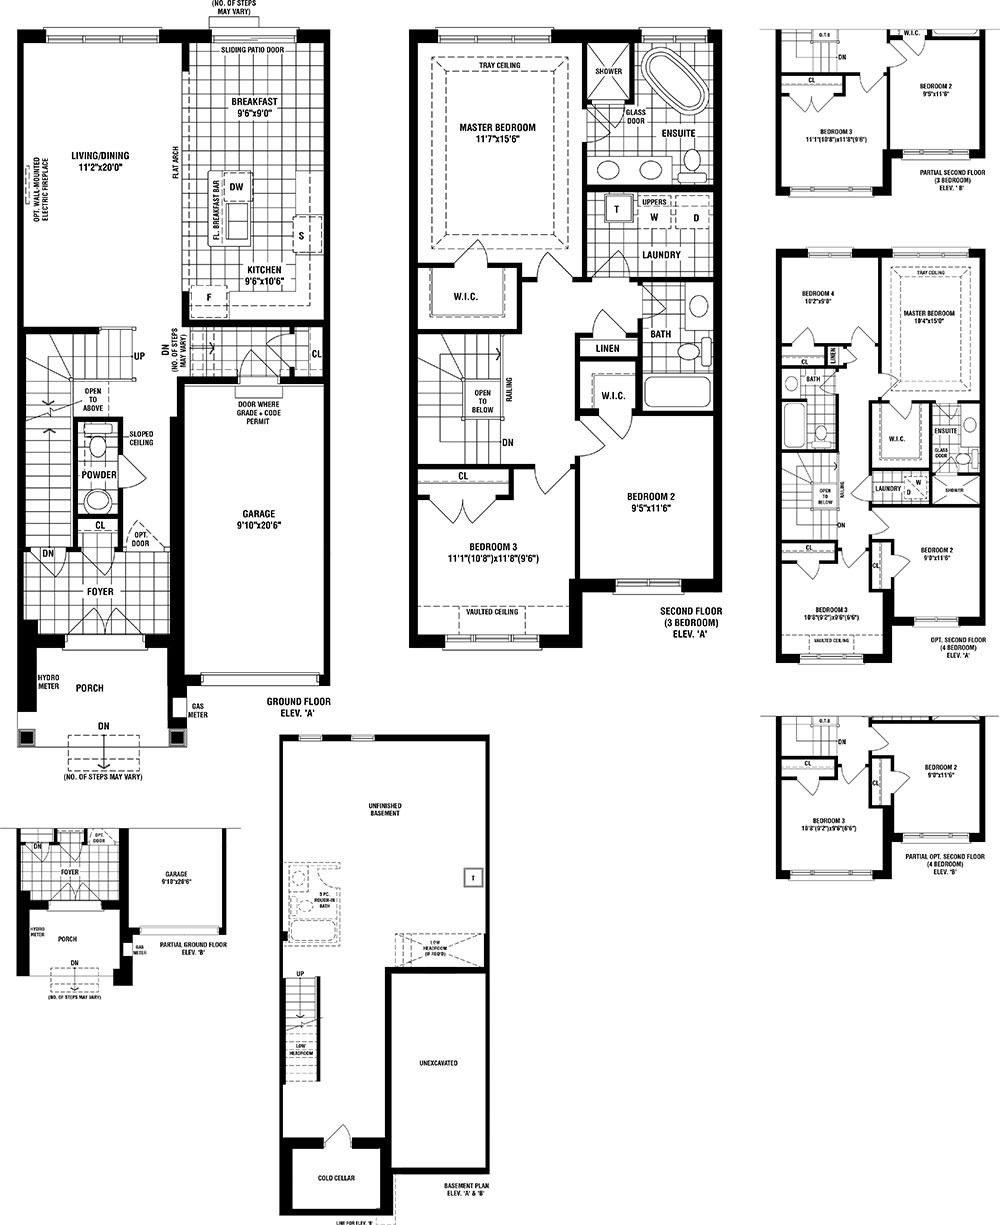 BLK97 TH-2 Floor Plan of Whitby Meadows Fieldgate Homes with undefined beds